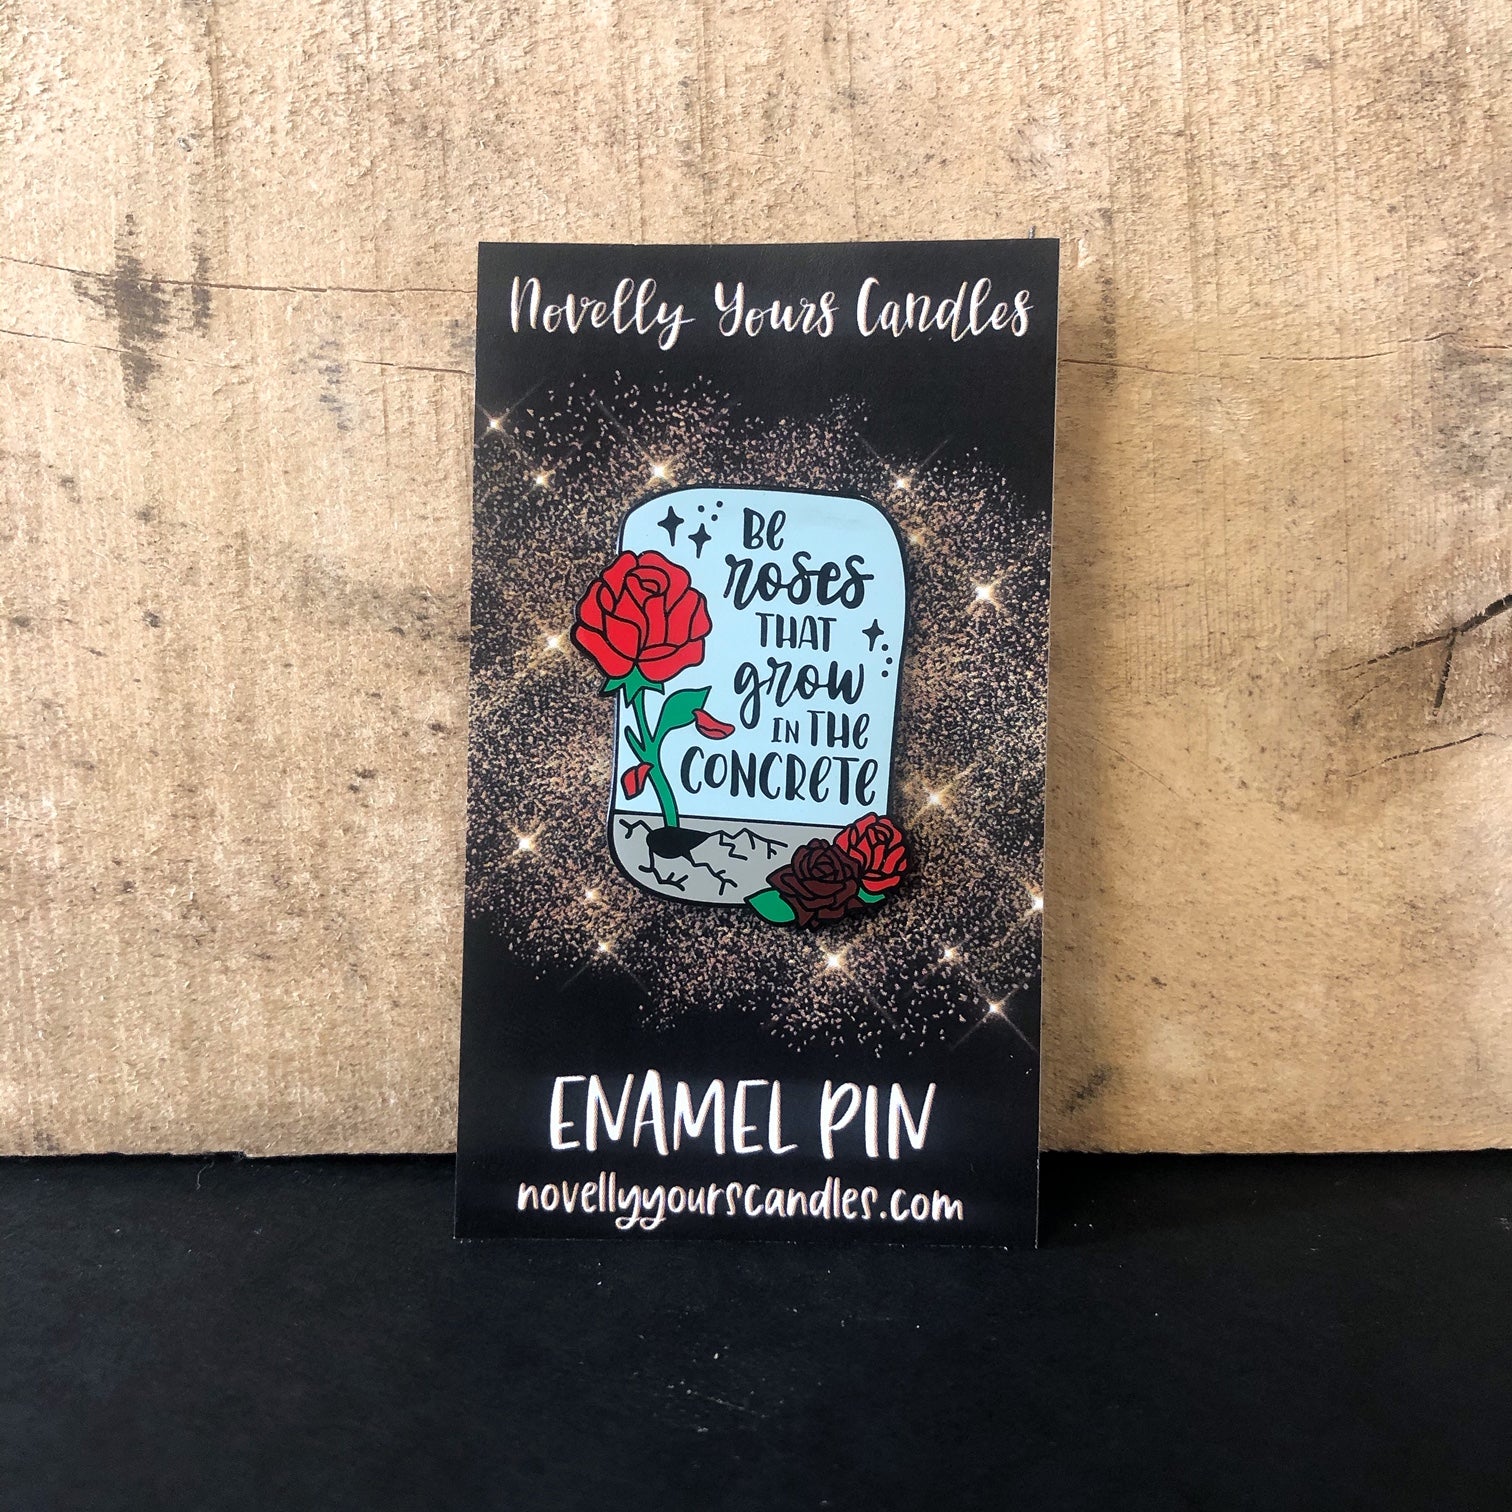 Enamel Pin: "Be Roses That Grow in the Concrete" (The Hate U Give)